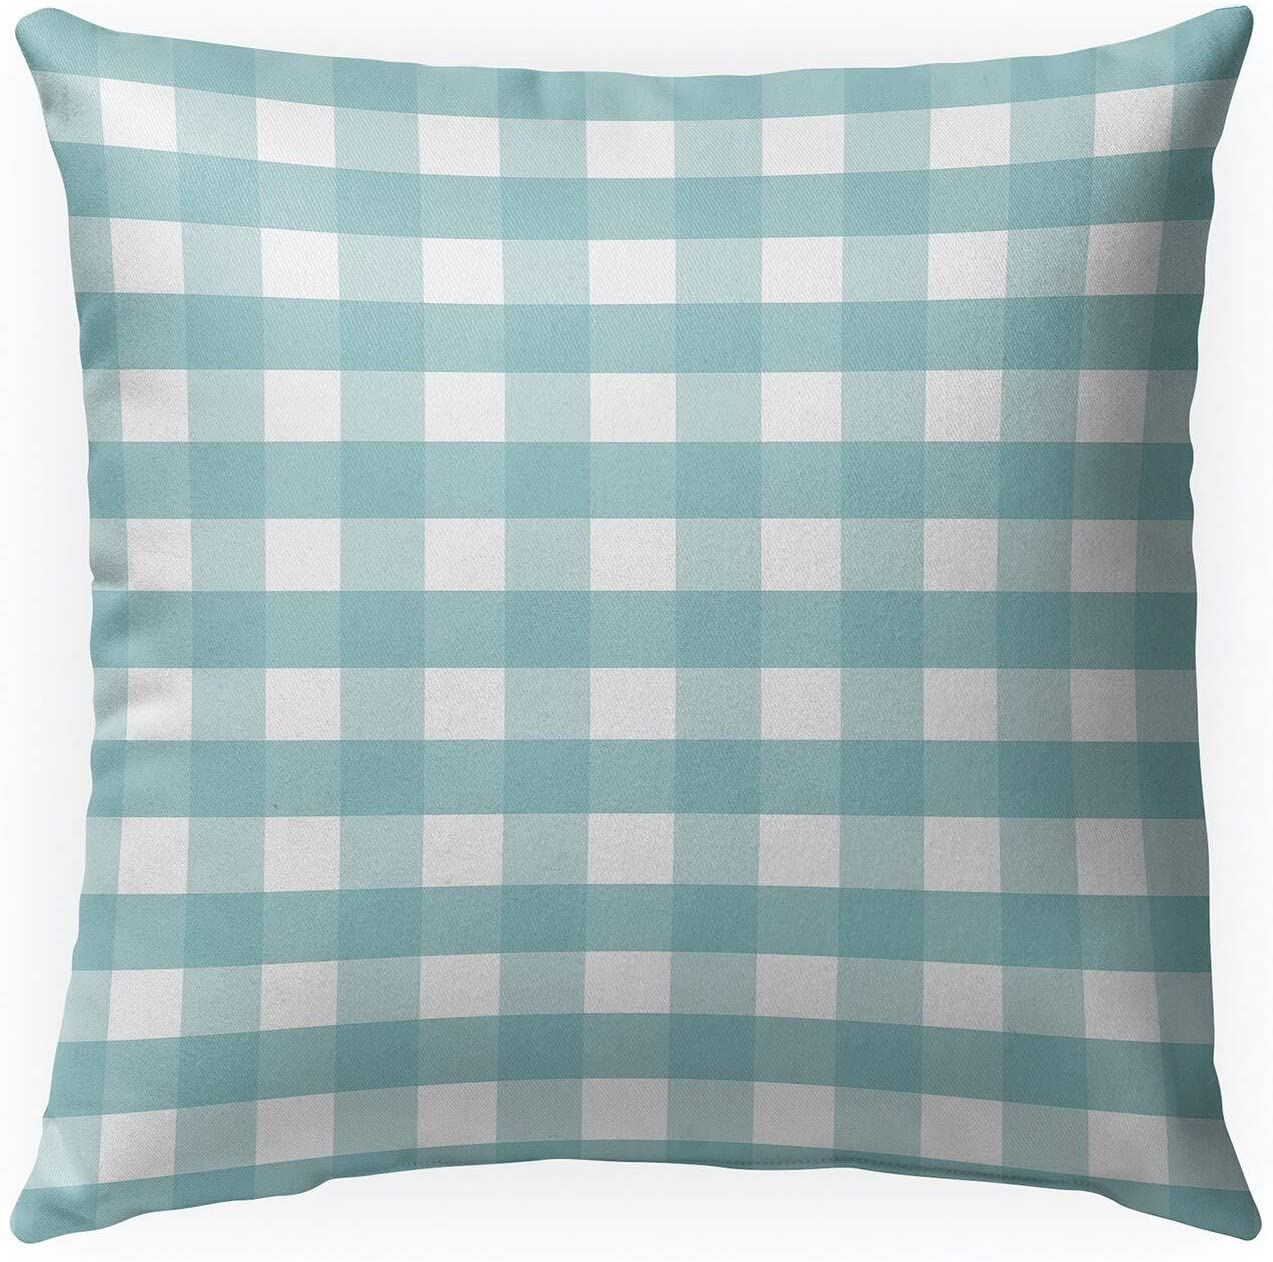 Aqua Gingham Dream Indoor|Outdoor Pillow by 18x18 Blue Plaid Modern Contemporary Polyester Removable Cover